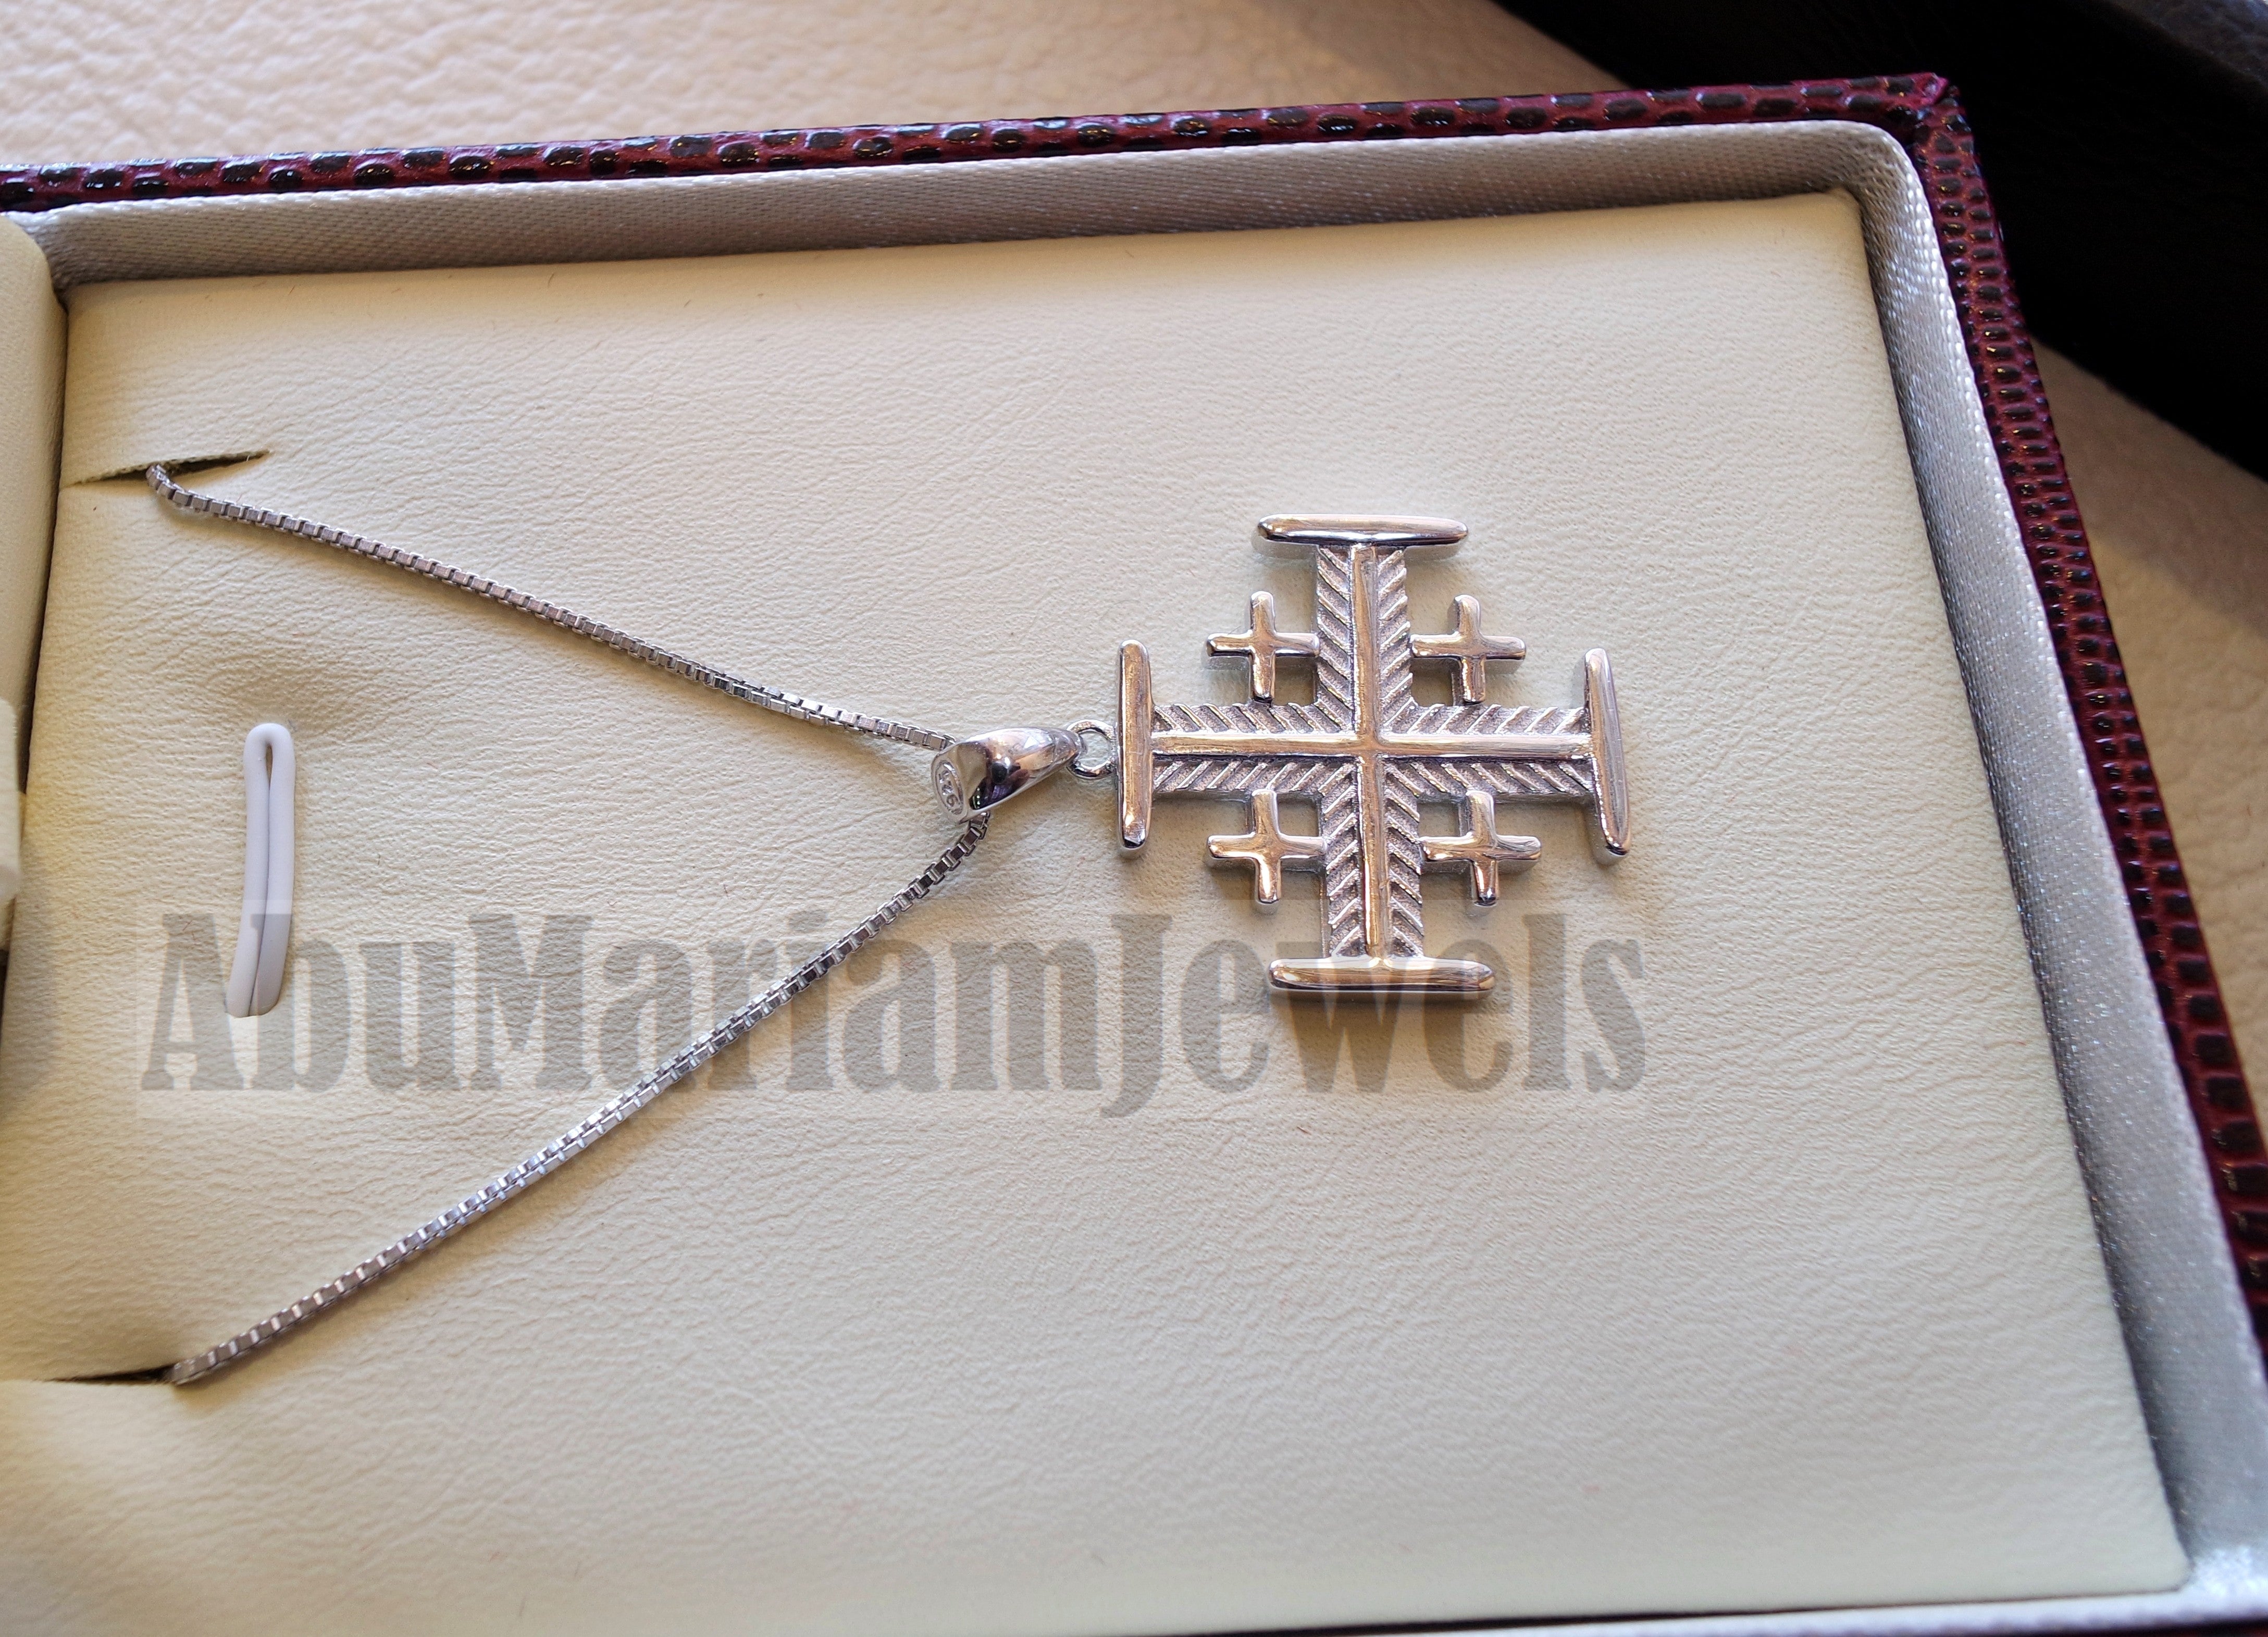 Jerusalem cross pendant sterling silver 925 middle eastern jewelry christianity vintage handmade heavy express shipping